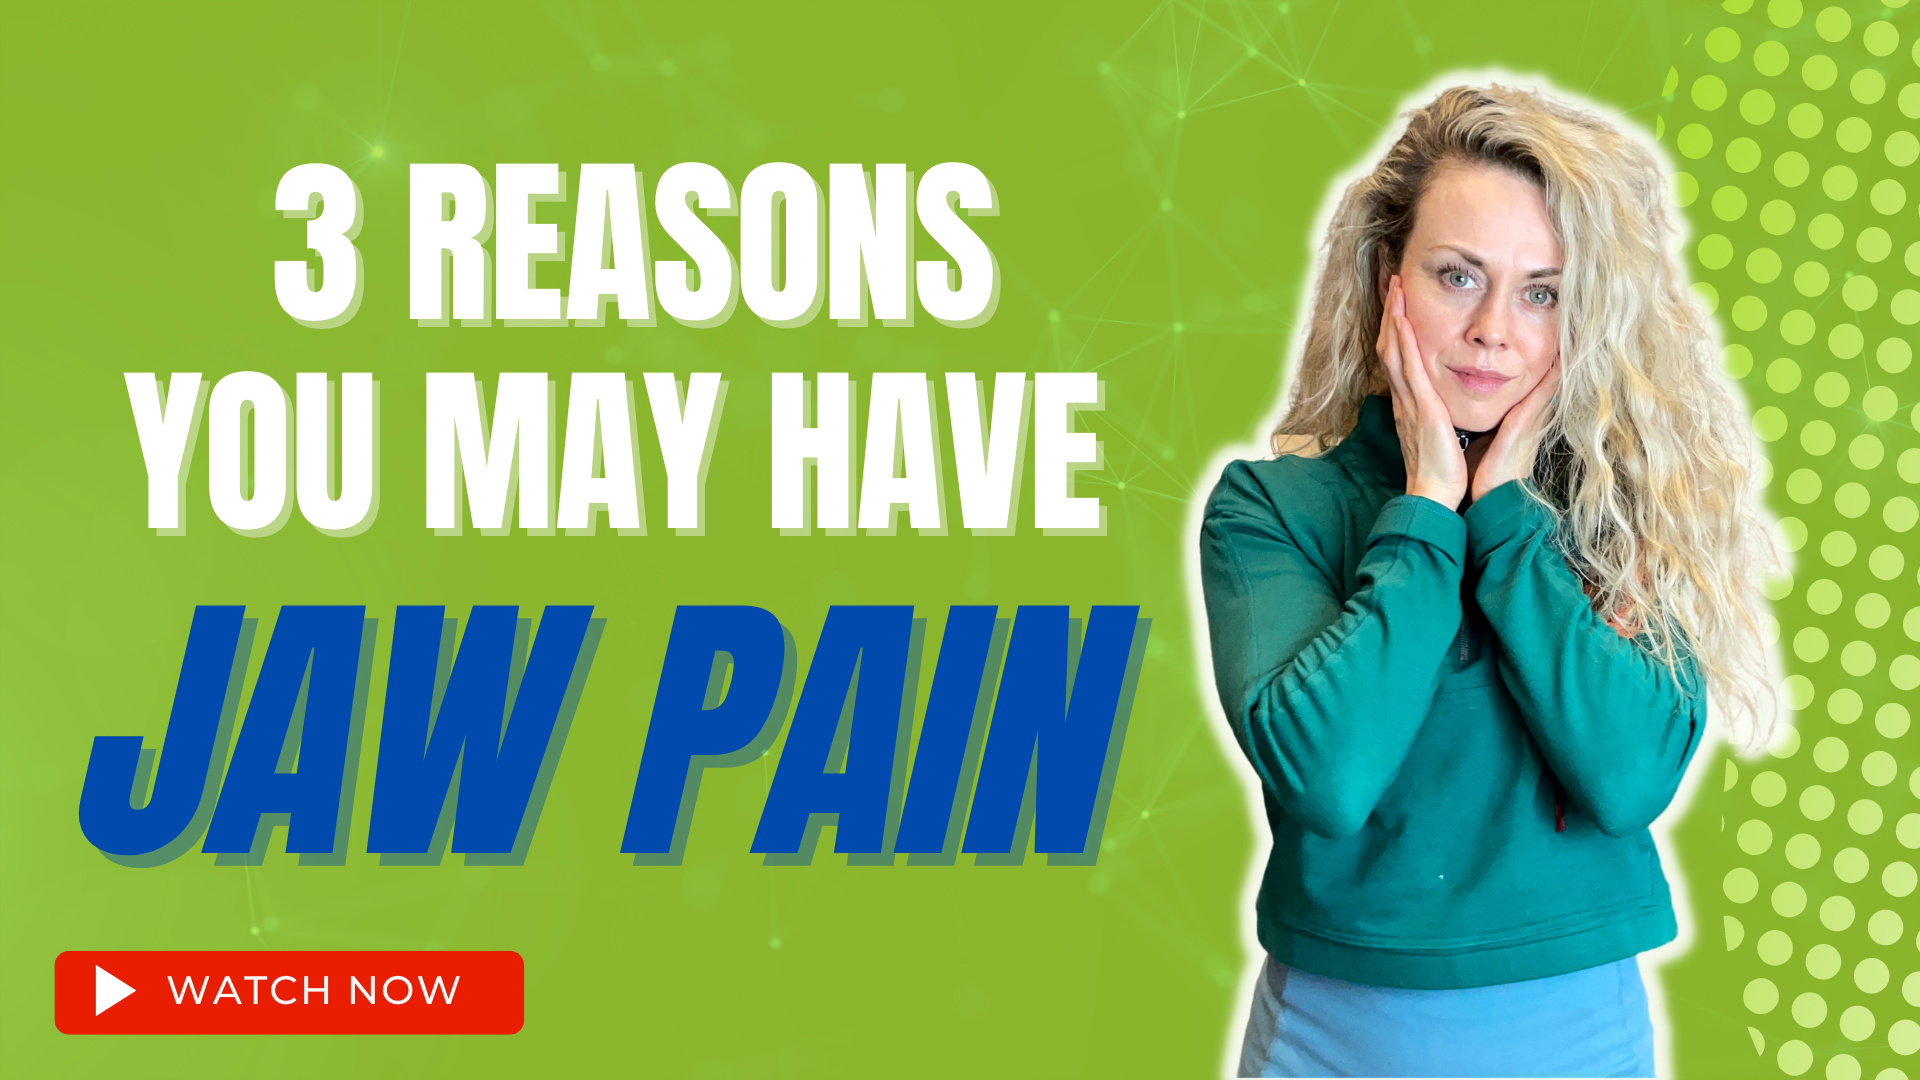 3 reasons you may have jaw pain